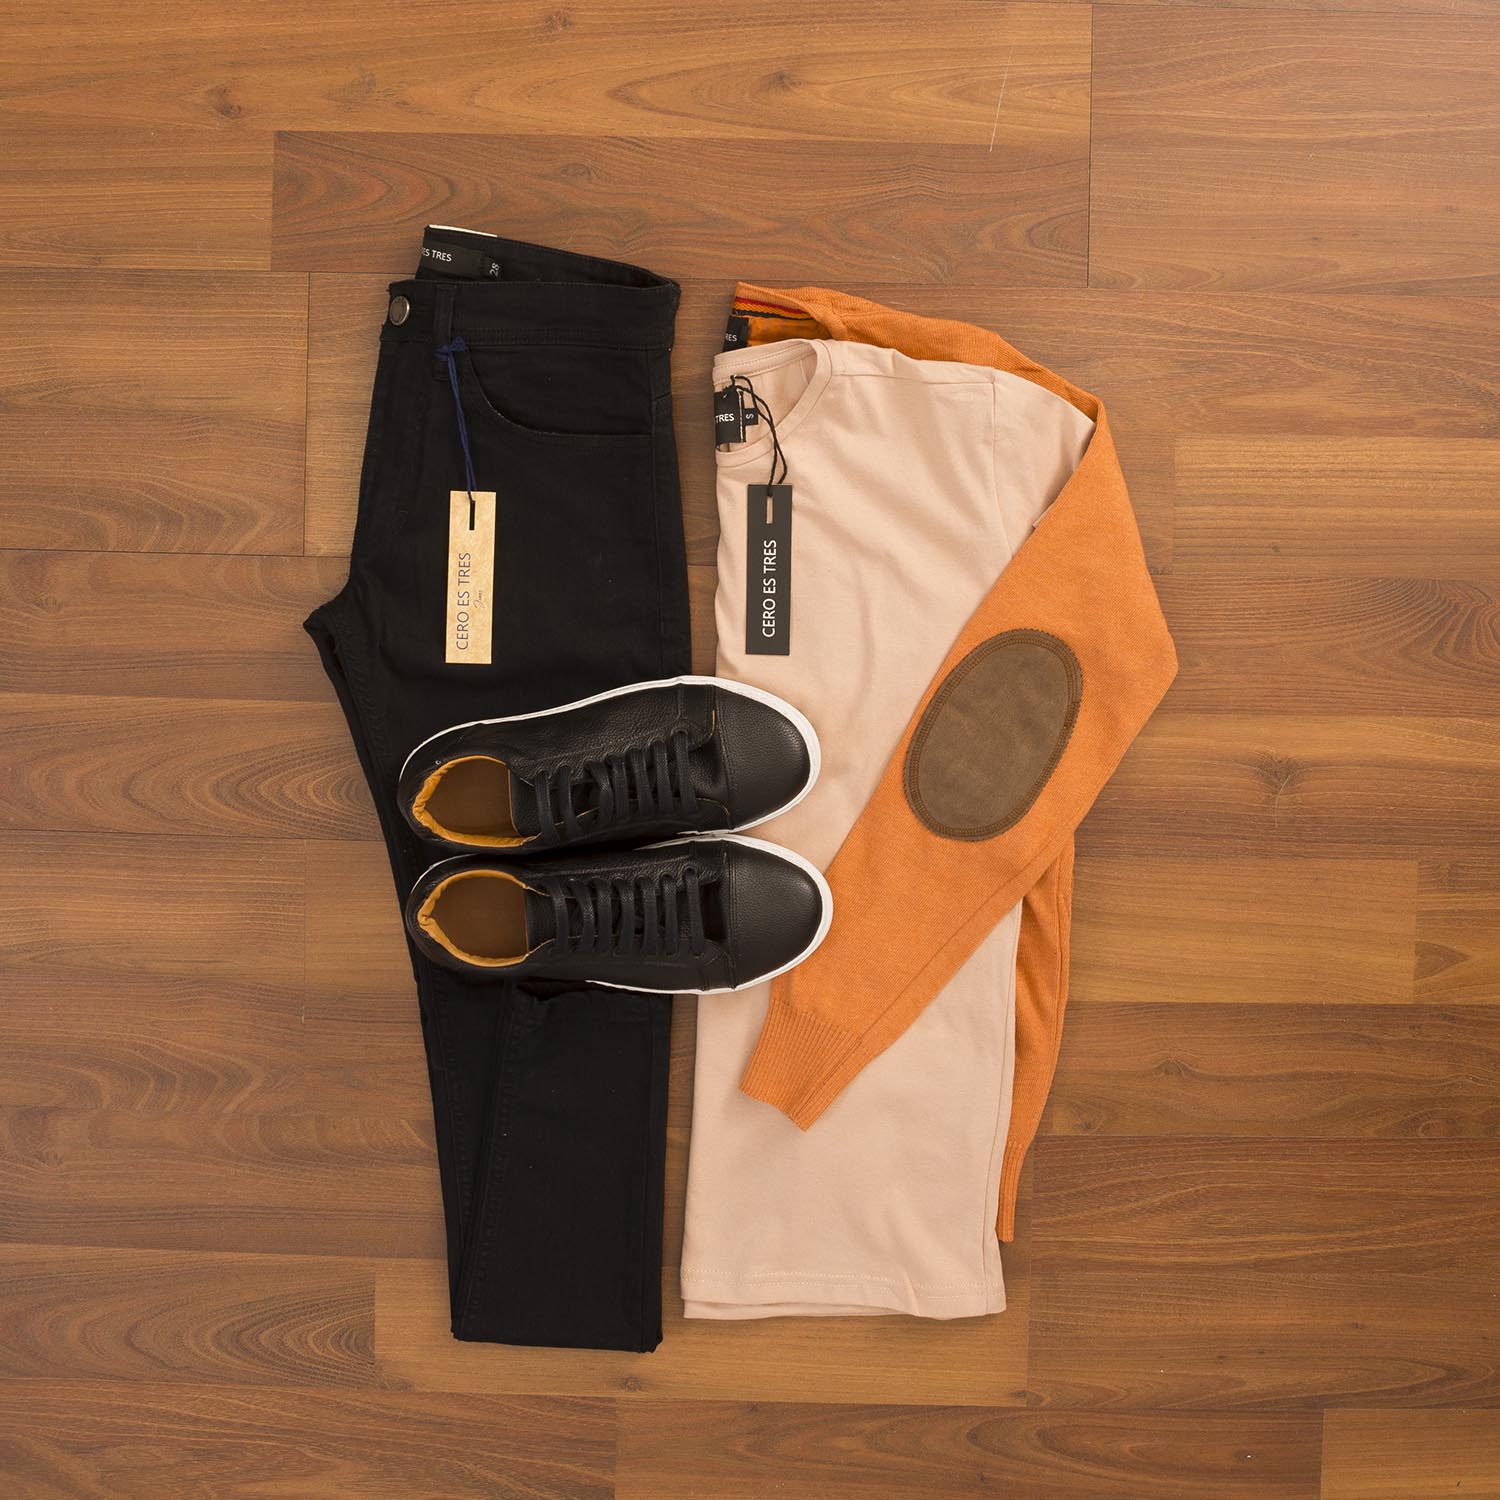 OUTFIT CERO 211